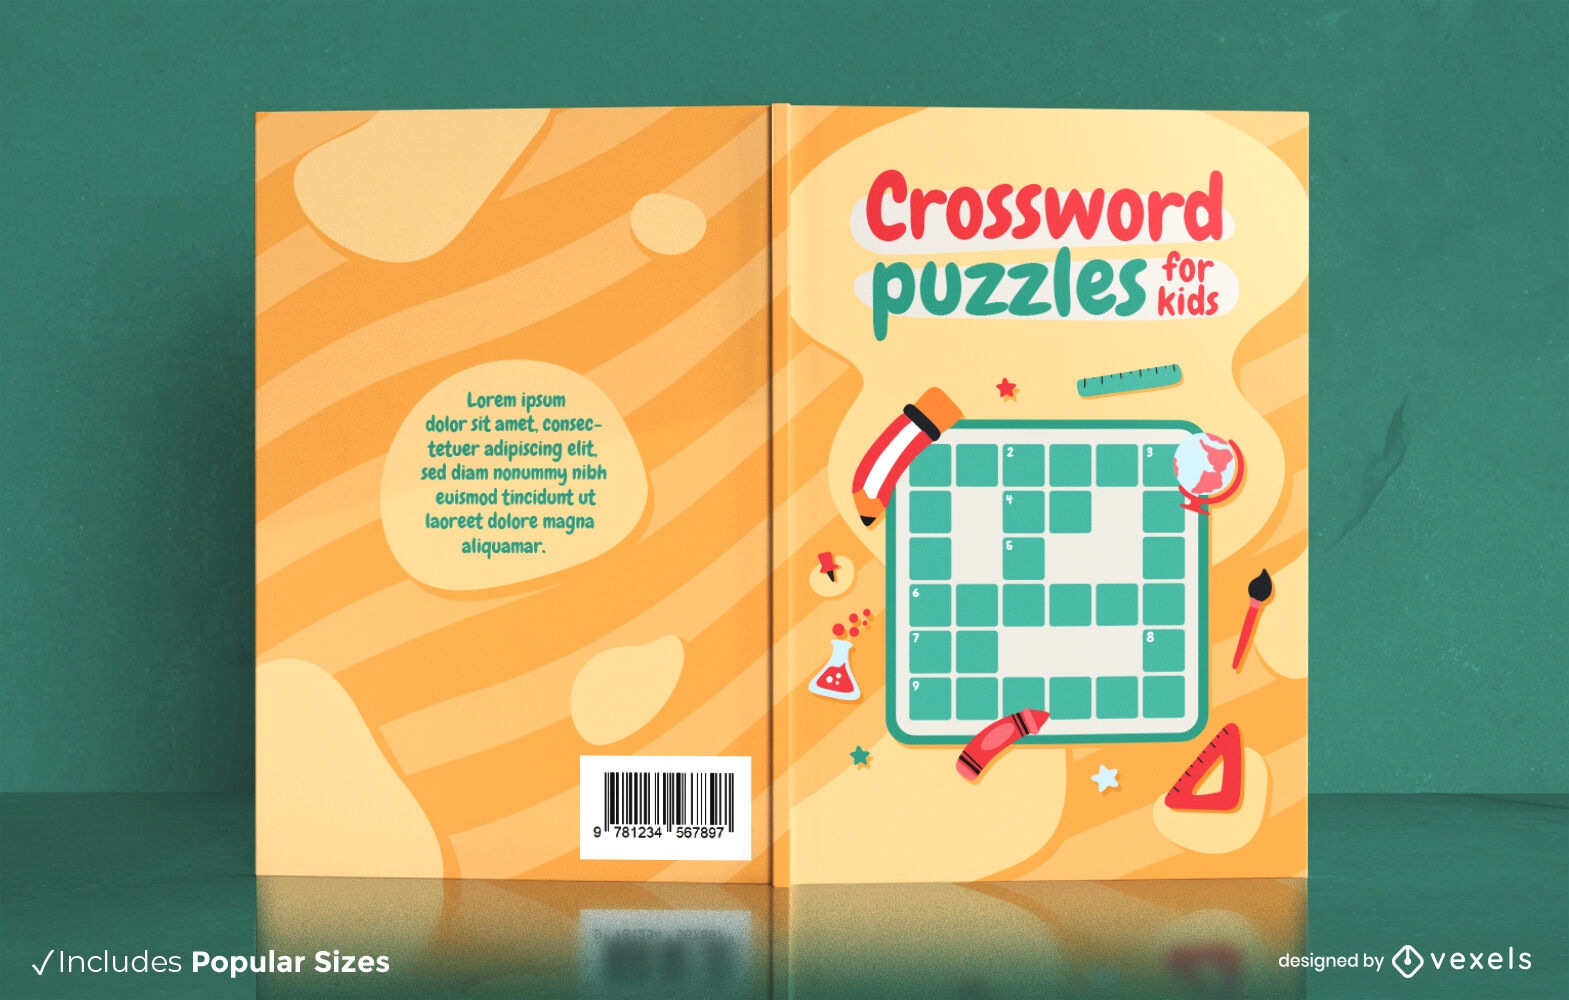 Crossword puzzles for kids book cover design